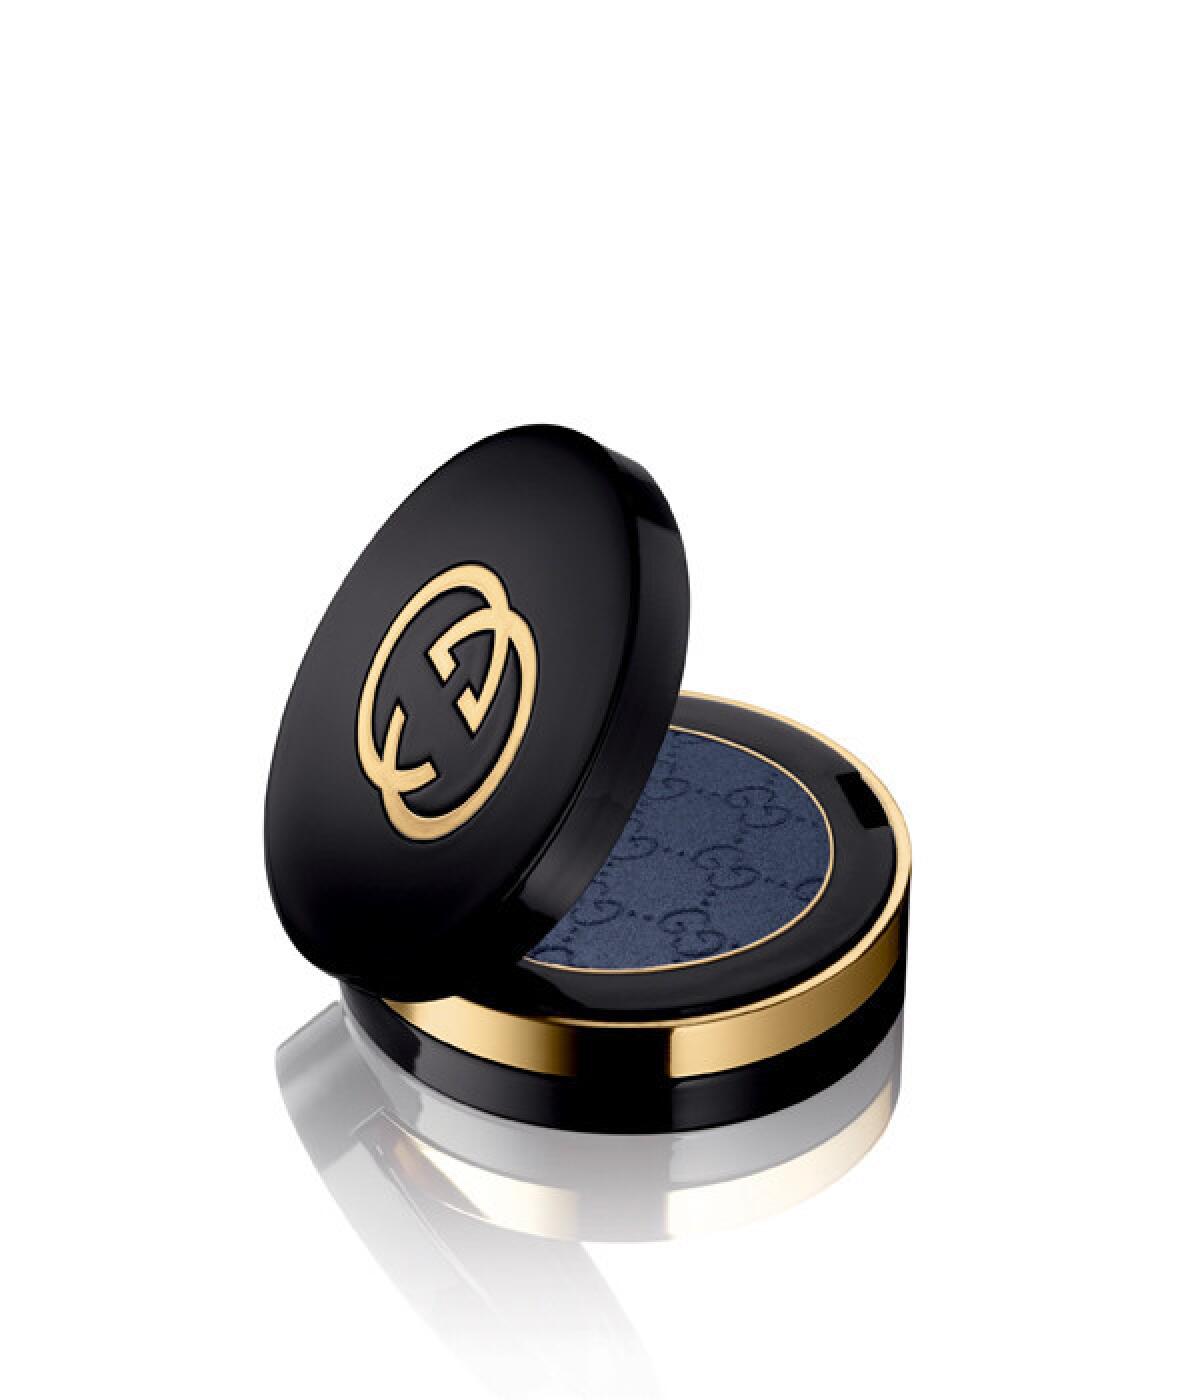 Gucci Magnetic Color Shadow in Midnight Blue and 18 other shades, $37 at select Gucci boutiques, Neiman Marcus and Saks Fifth Avenue stores in mid-October.